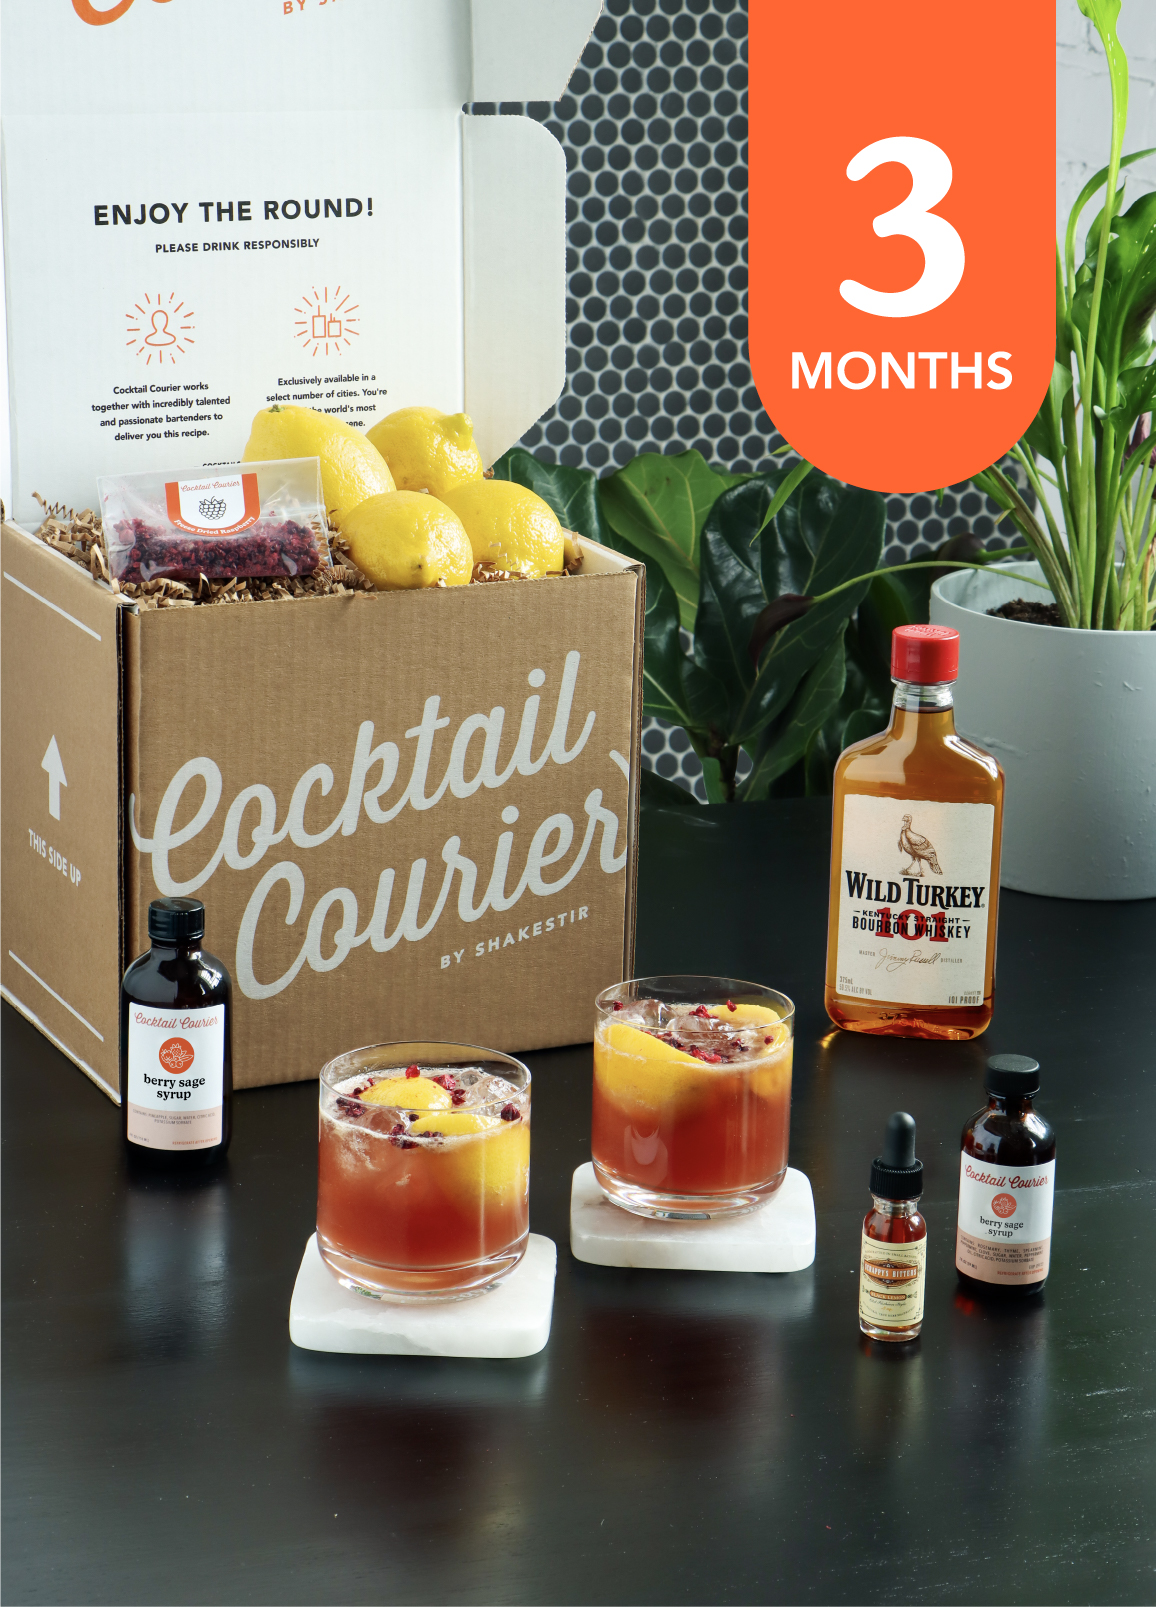 Cocktail Courier kit with example of cocktails and a text description of the offering.